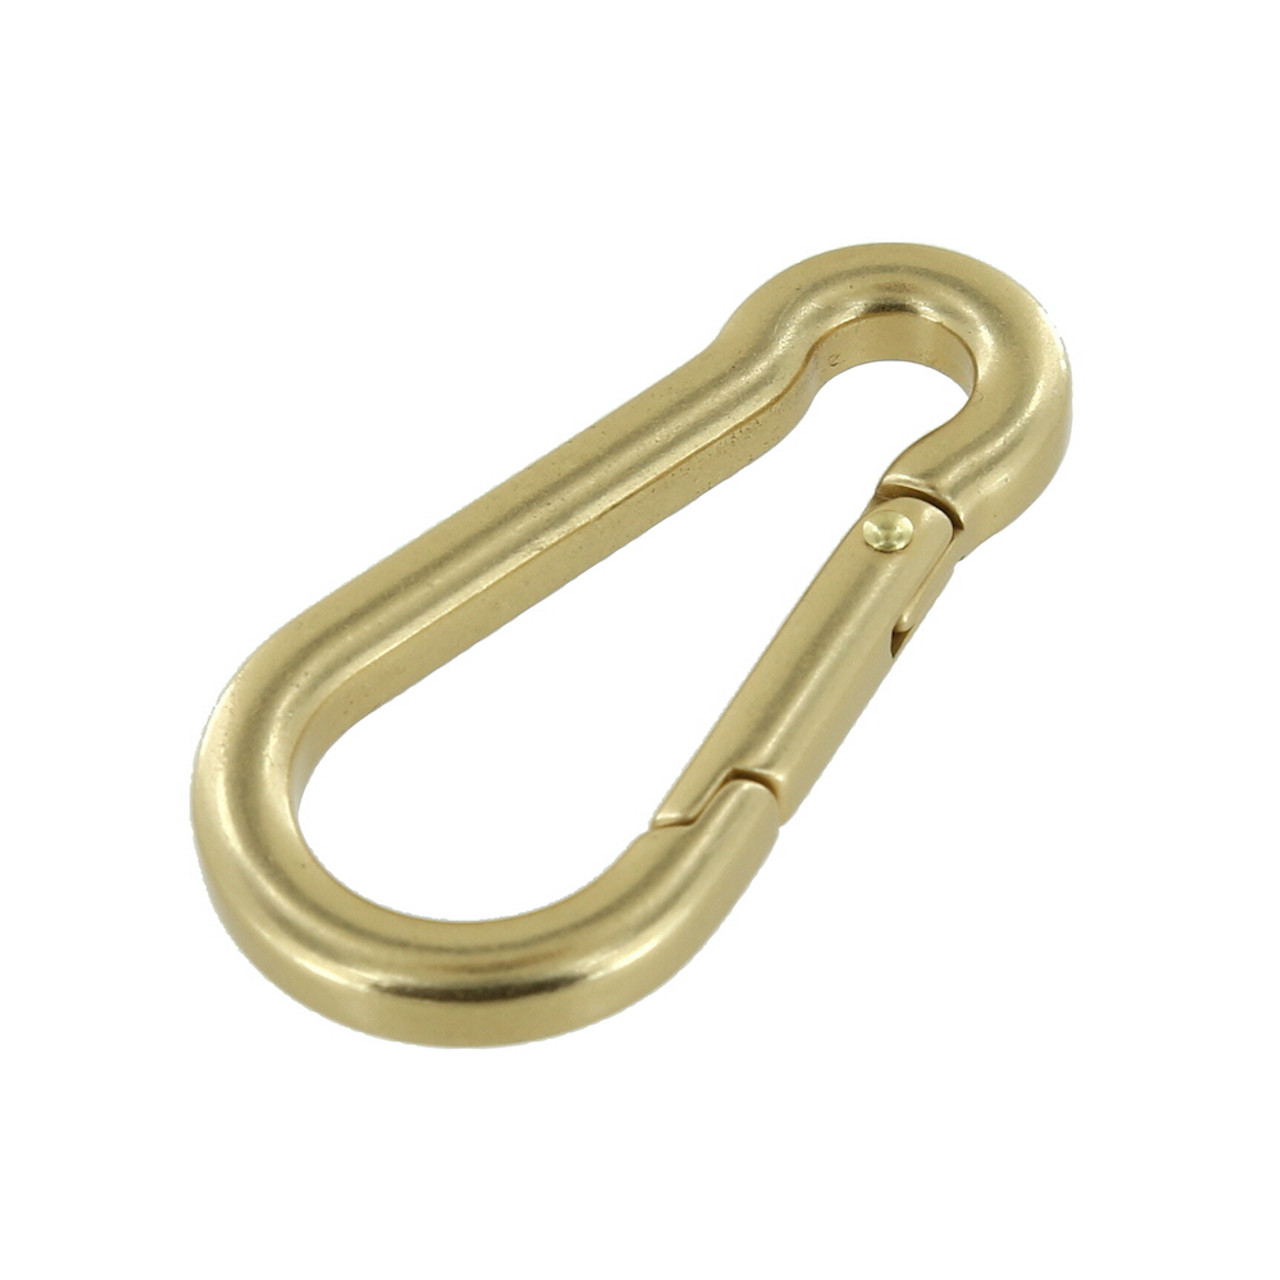 Solid Brass Lanyard Clips Carabiner Clasps Keyring Bag Findings 25mm 33mm  50m (#332883472461)